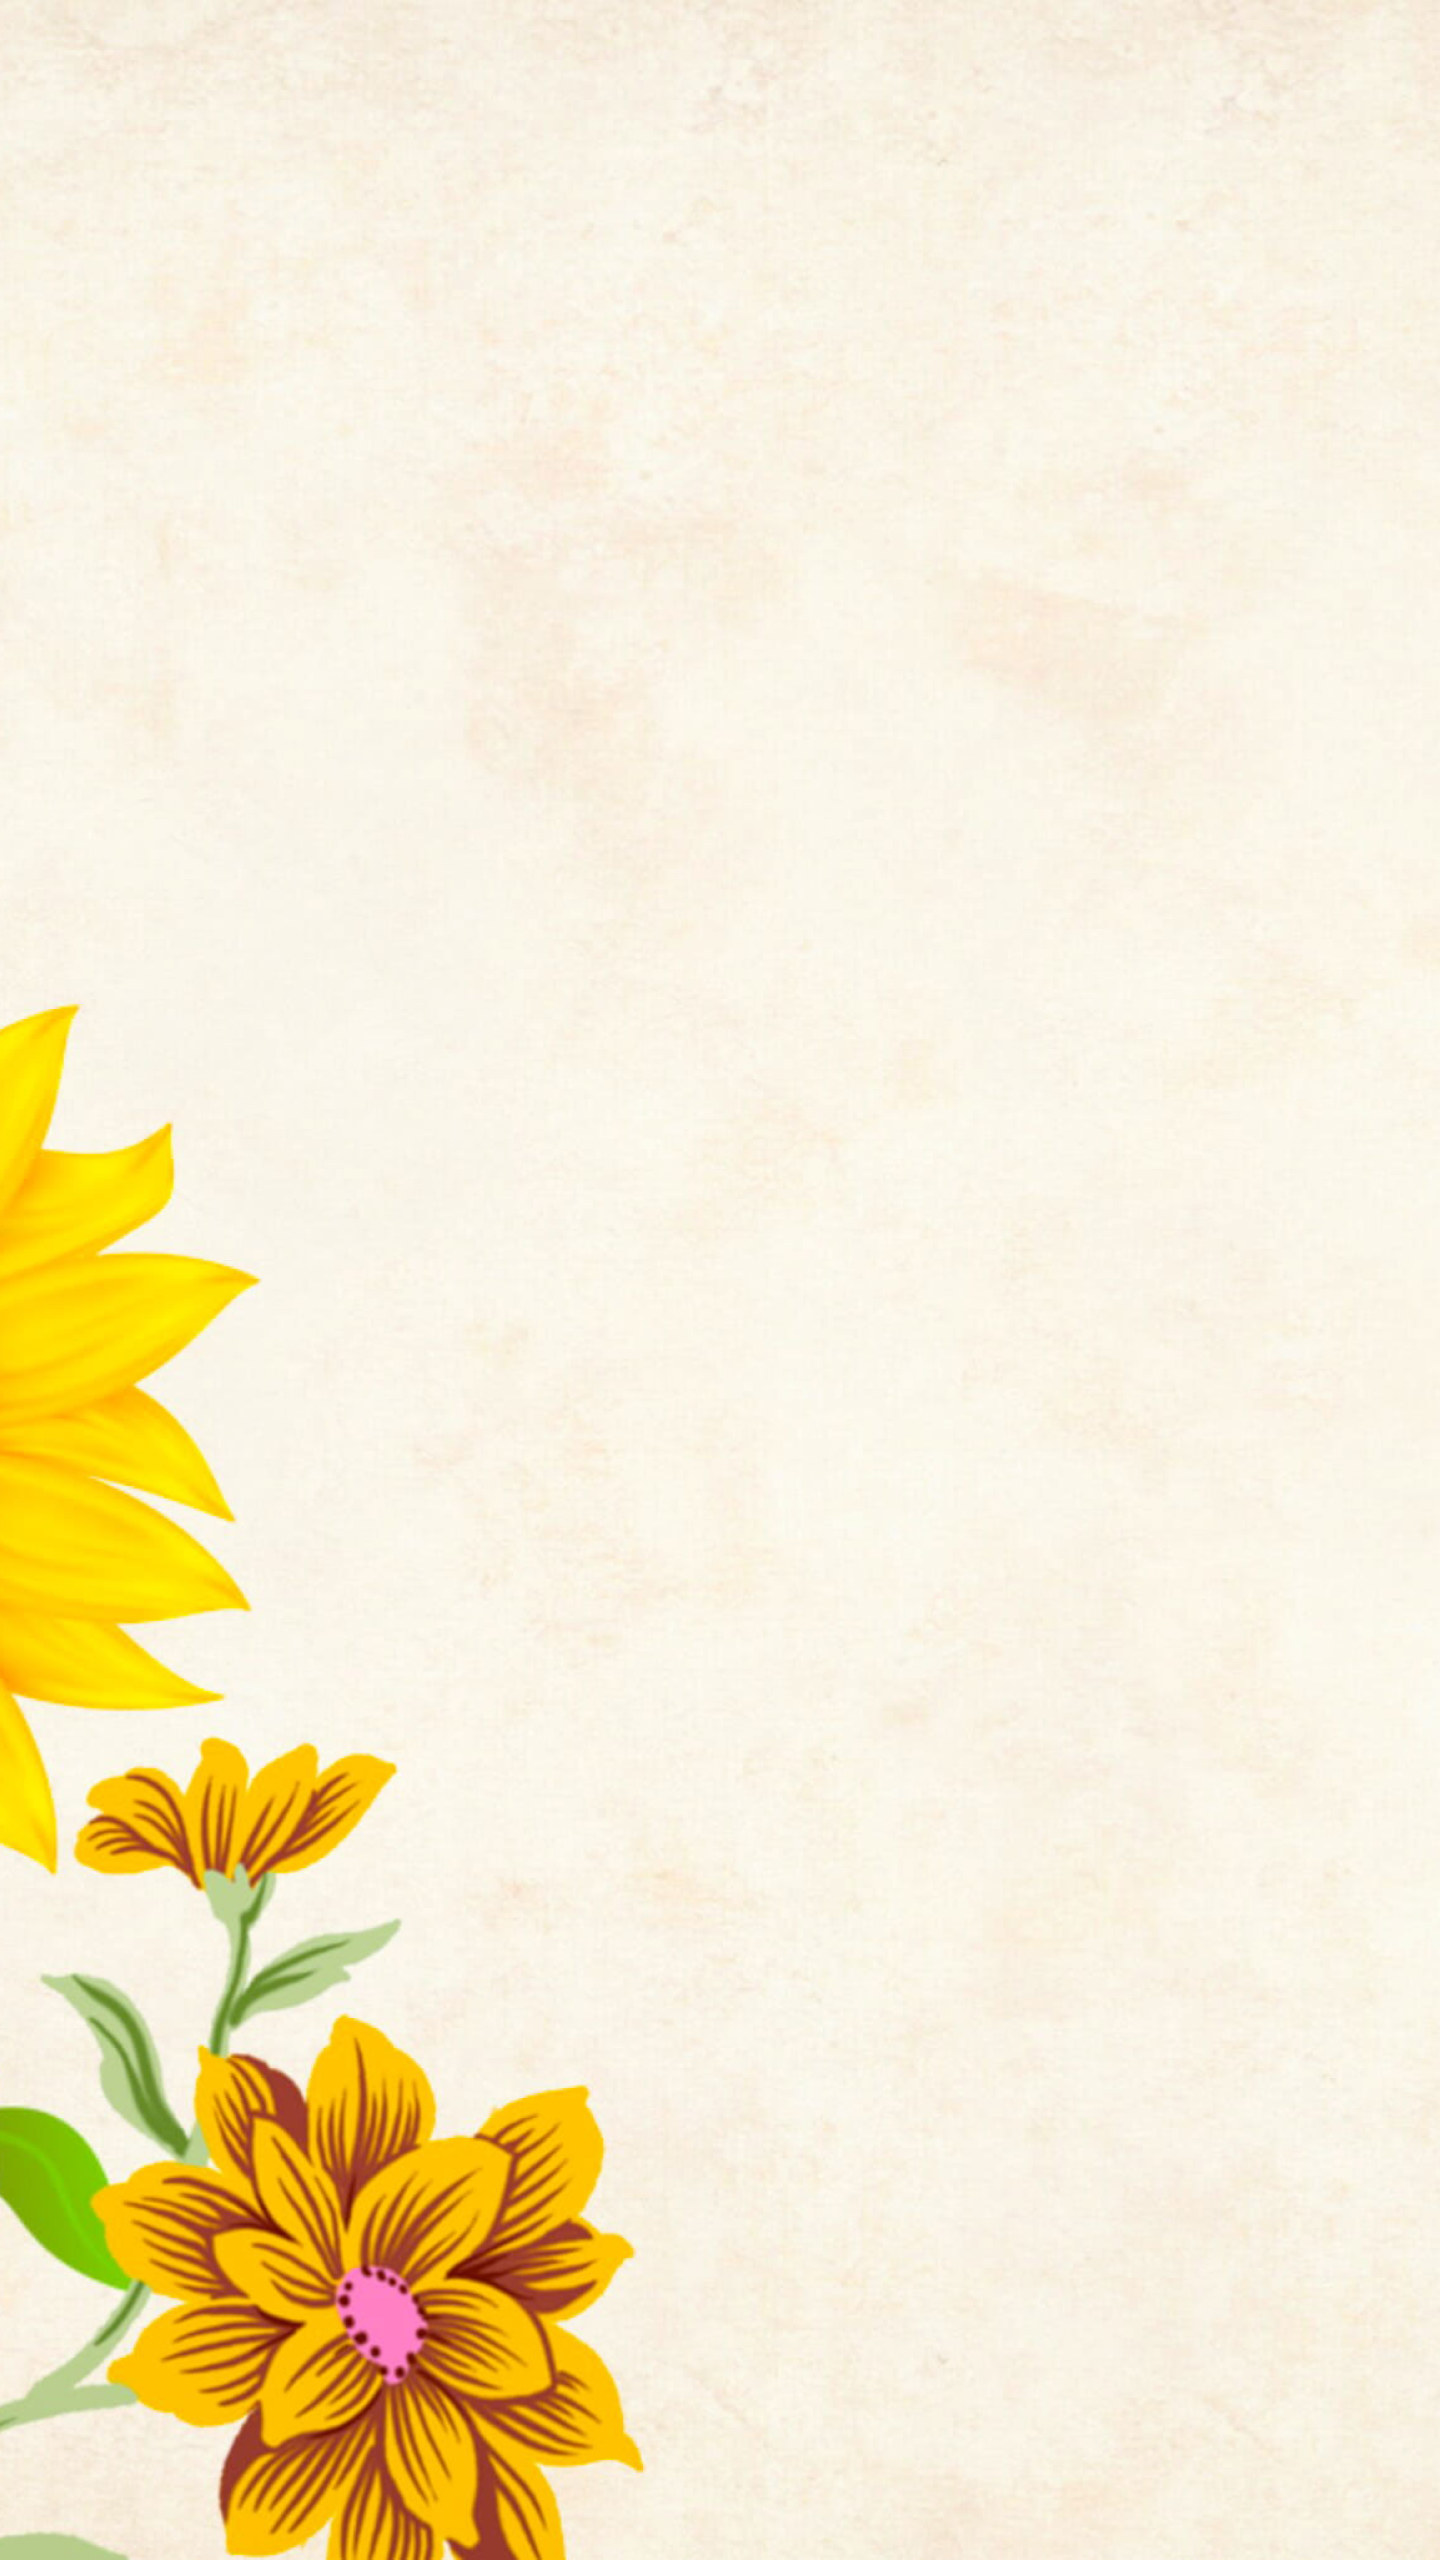 Yellow Flower Wallpaper With Copyspace, Floral, Border, Garden Frame • Wallpaper For You